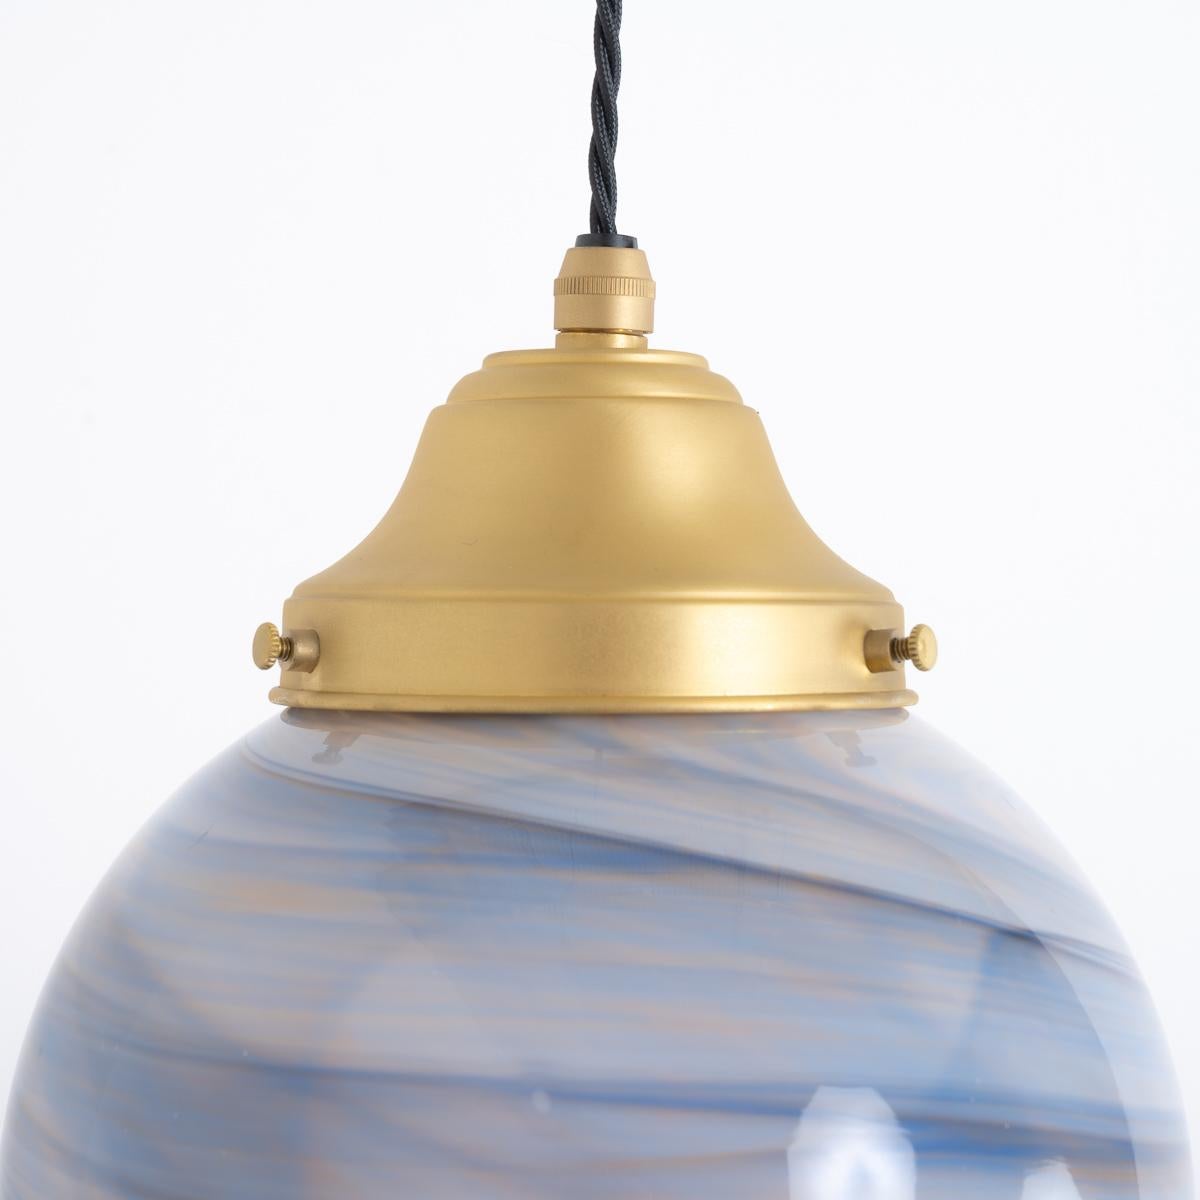 Murano Marbled Glass Globes Pendant Lights with Satin Brass Fittings For Sale 2